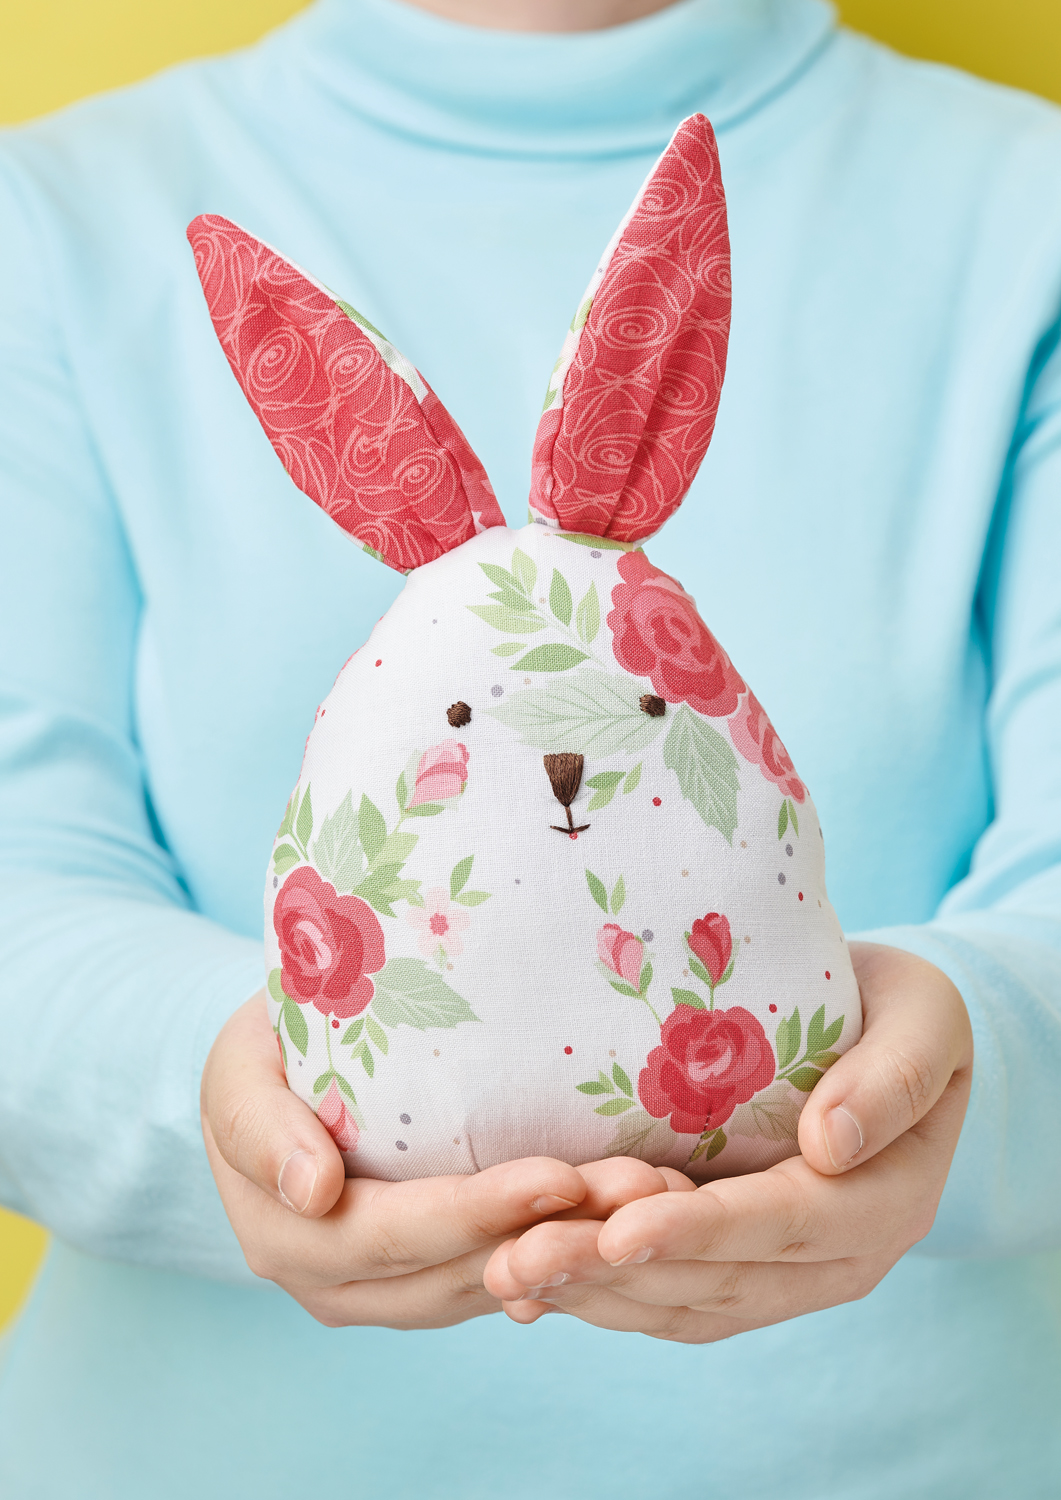 template-free-printable-floppy-eared-bunny-sewing-pattern-floppy